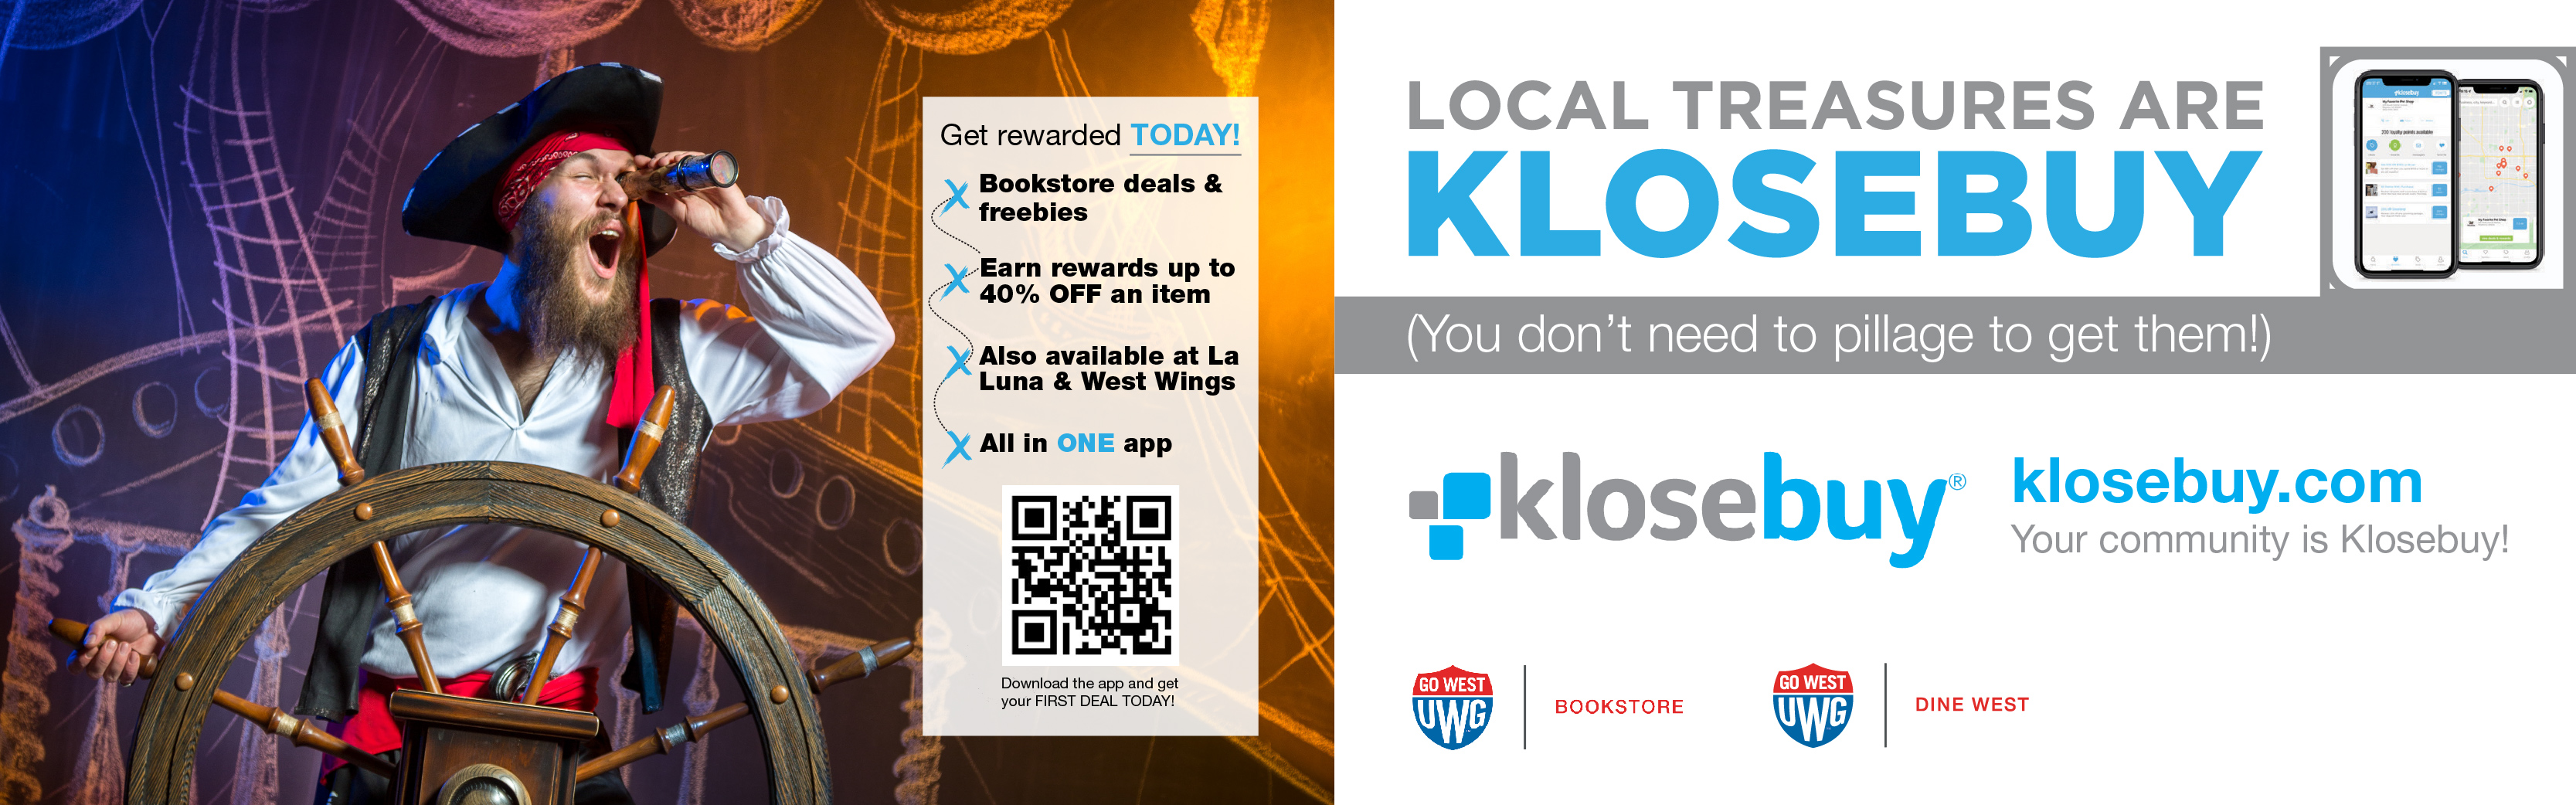 Download the Klosebuy app and discover deals at local shops.